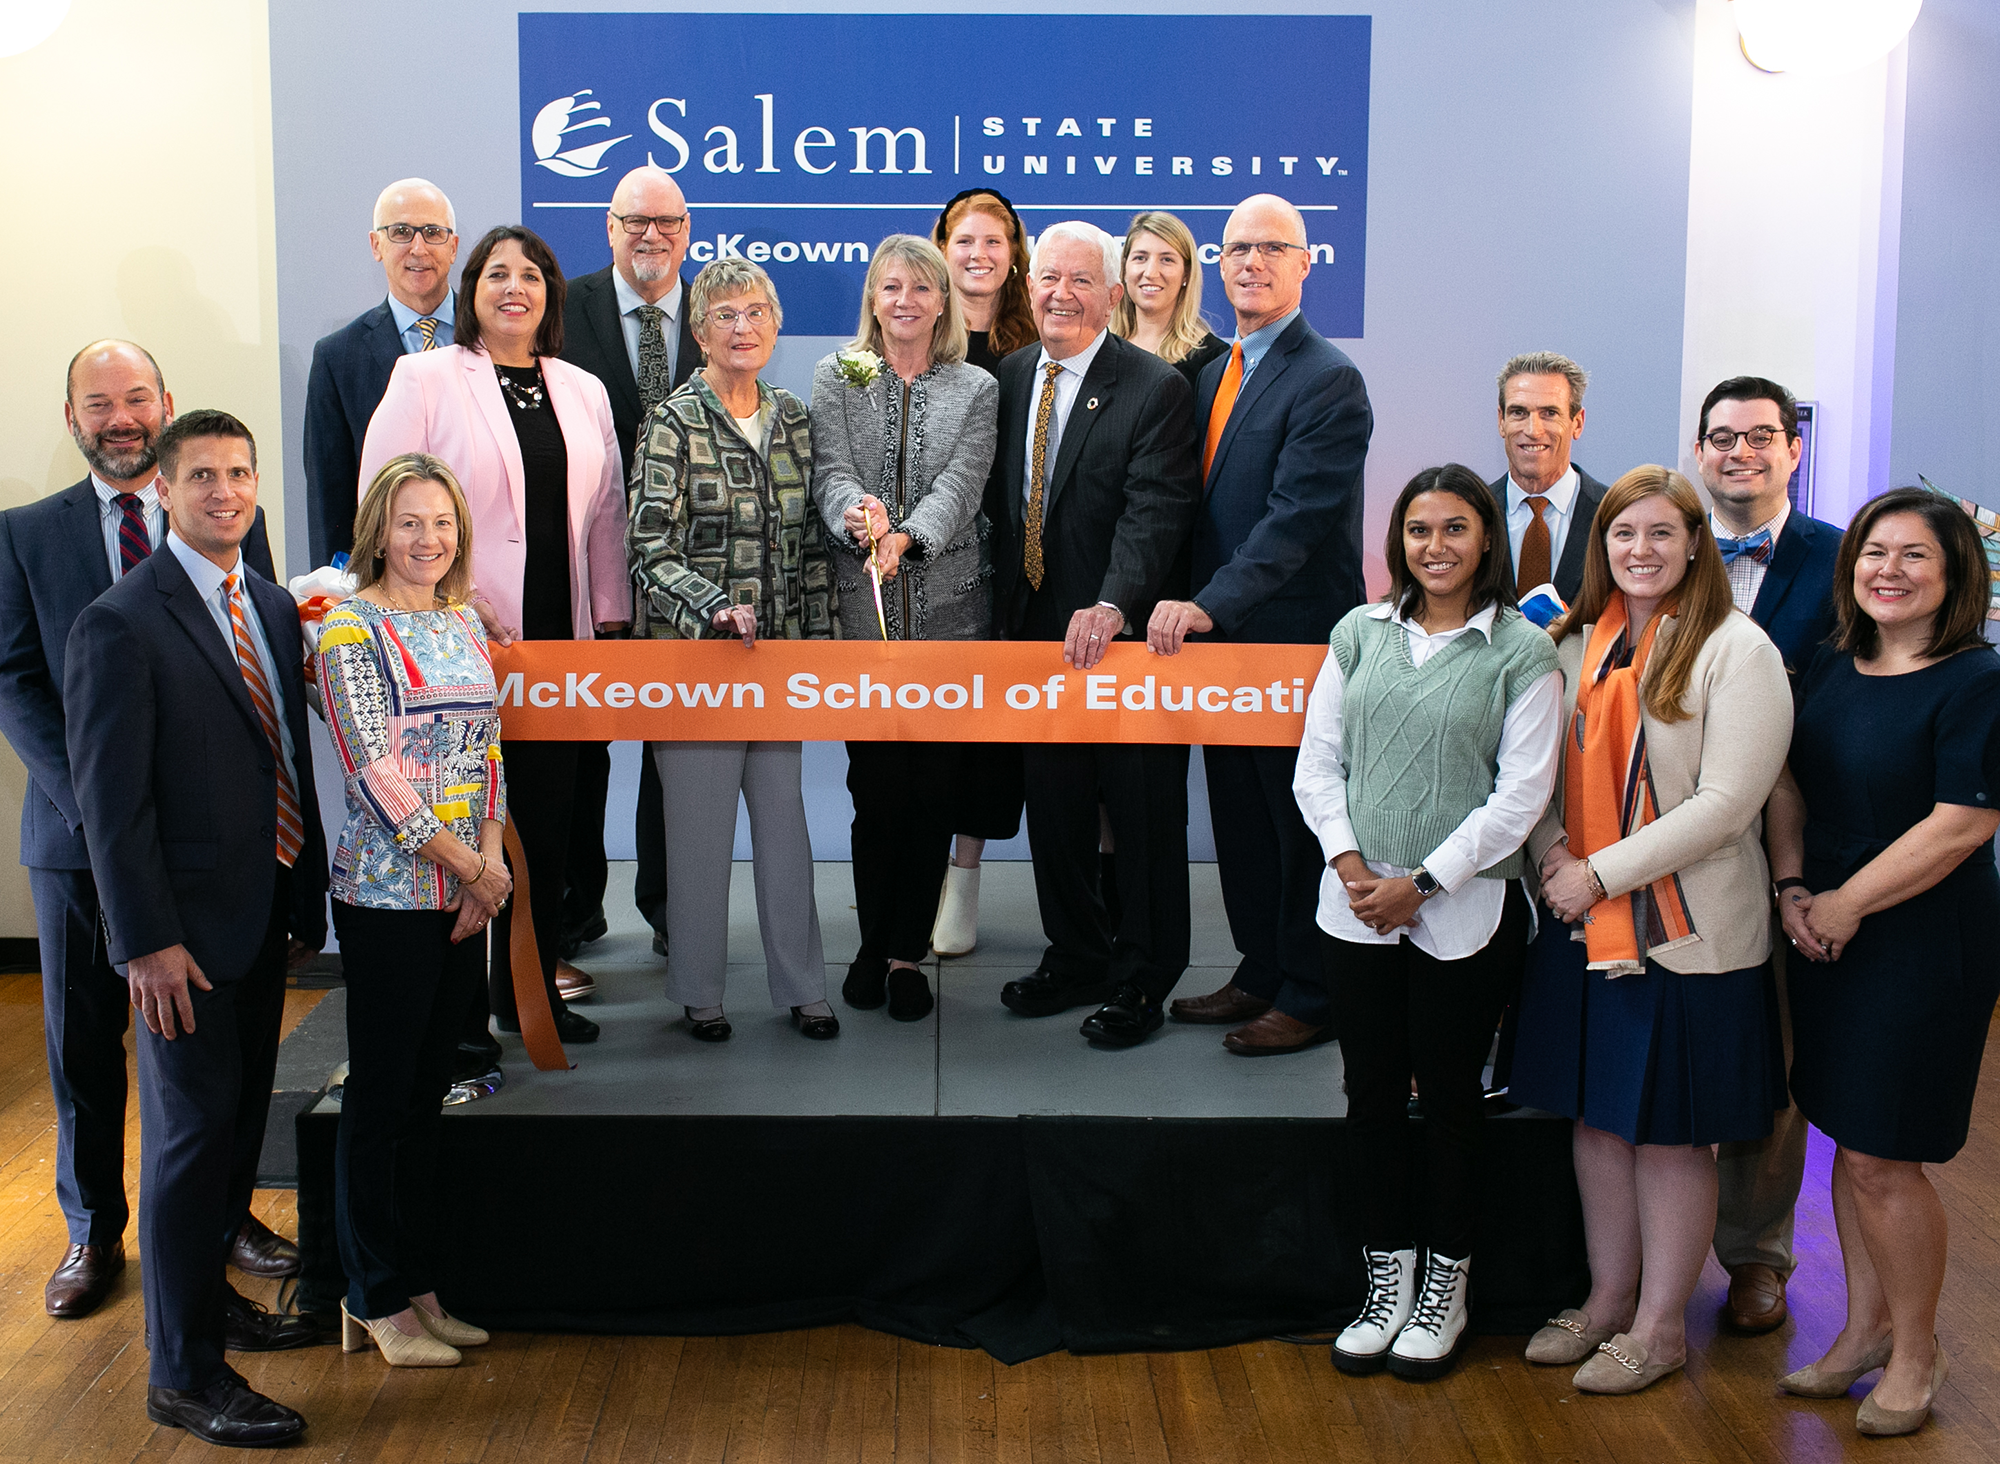 Salem State University celebrated the naming of the McKeown School of Education…